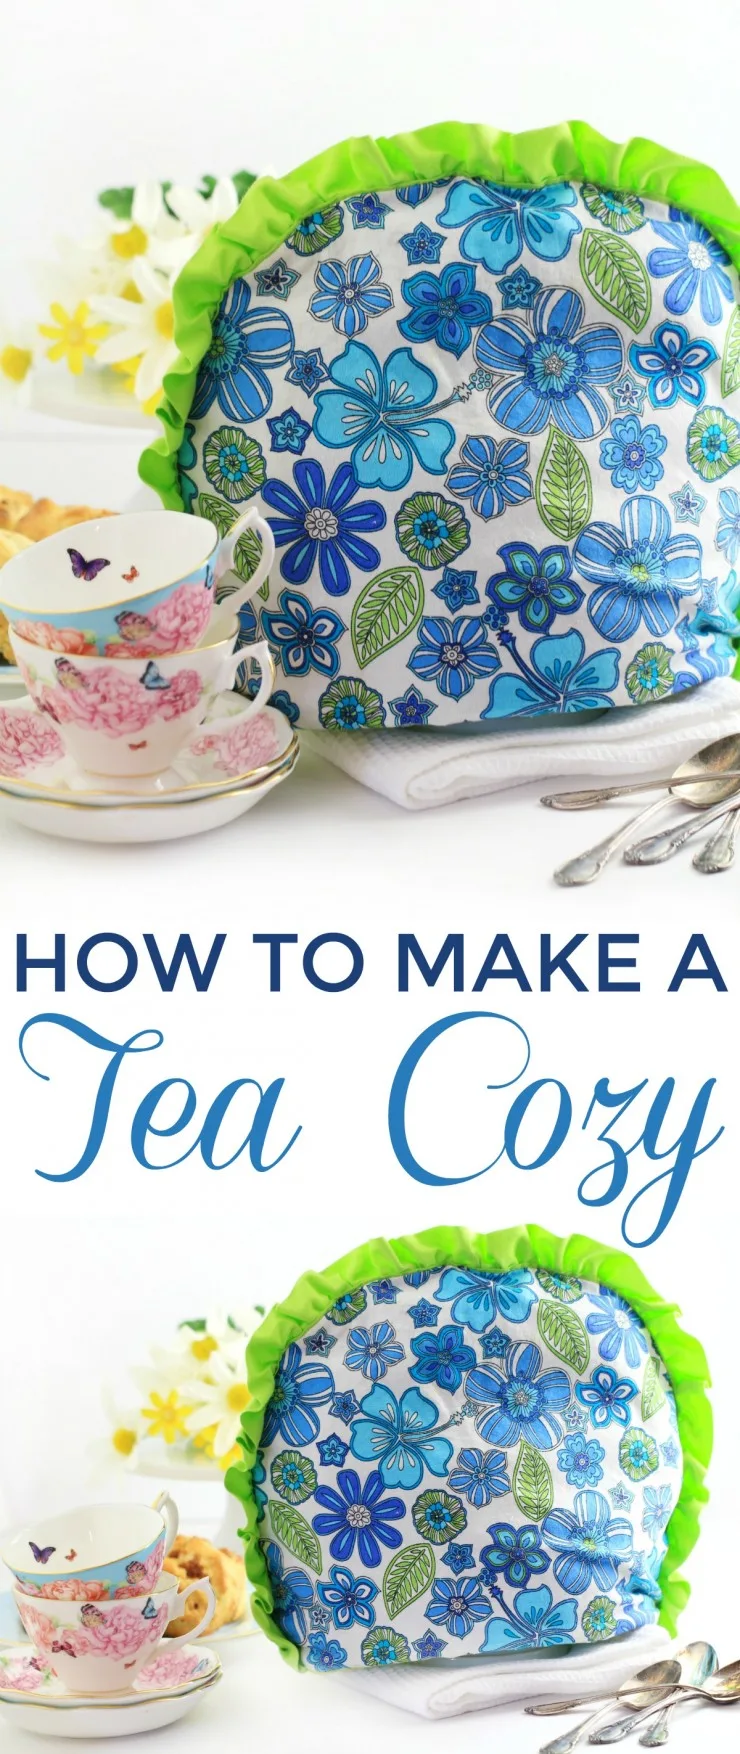 Learn how to Make a Tea Cozy with this simple diy sewing tutorial that will help you make your own Tea Cozy pattern to fit your tea pot!